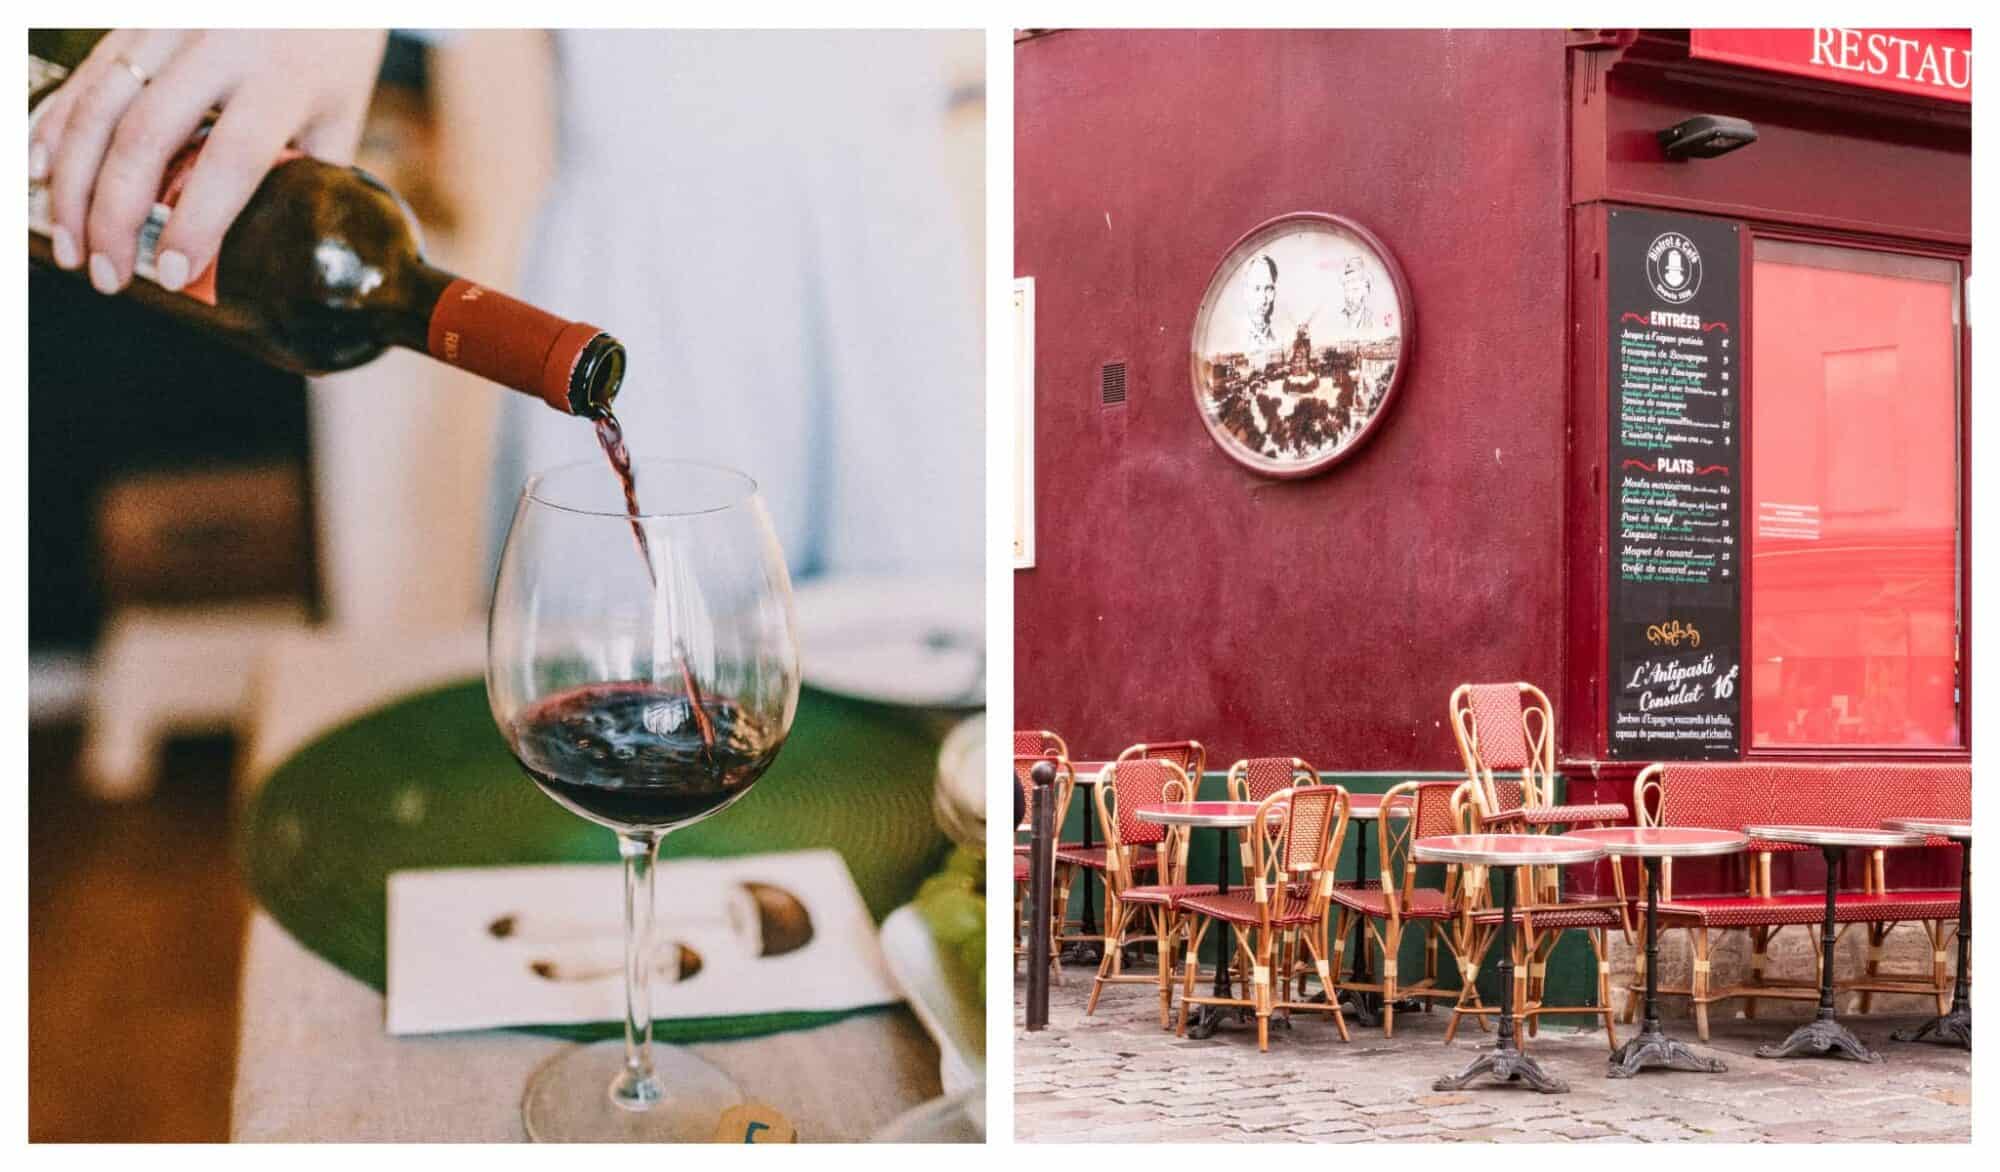 Left: red wine being poured into a glass, Right: a cafe in Montmartre paris with chairs